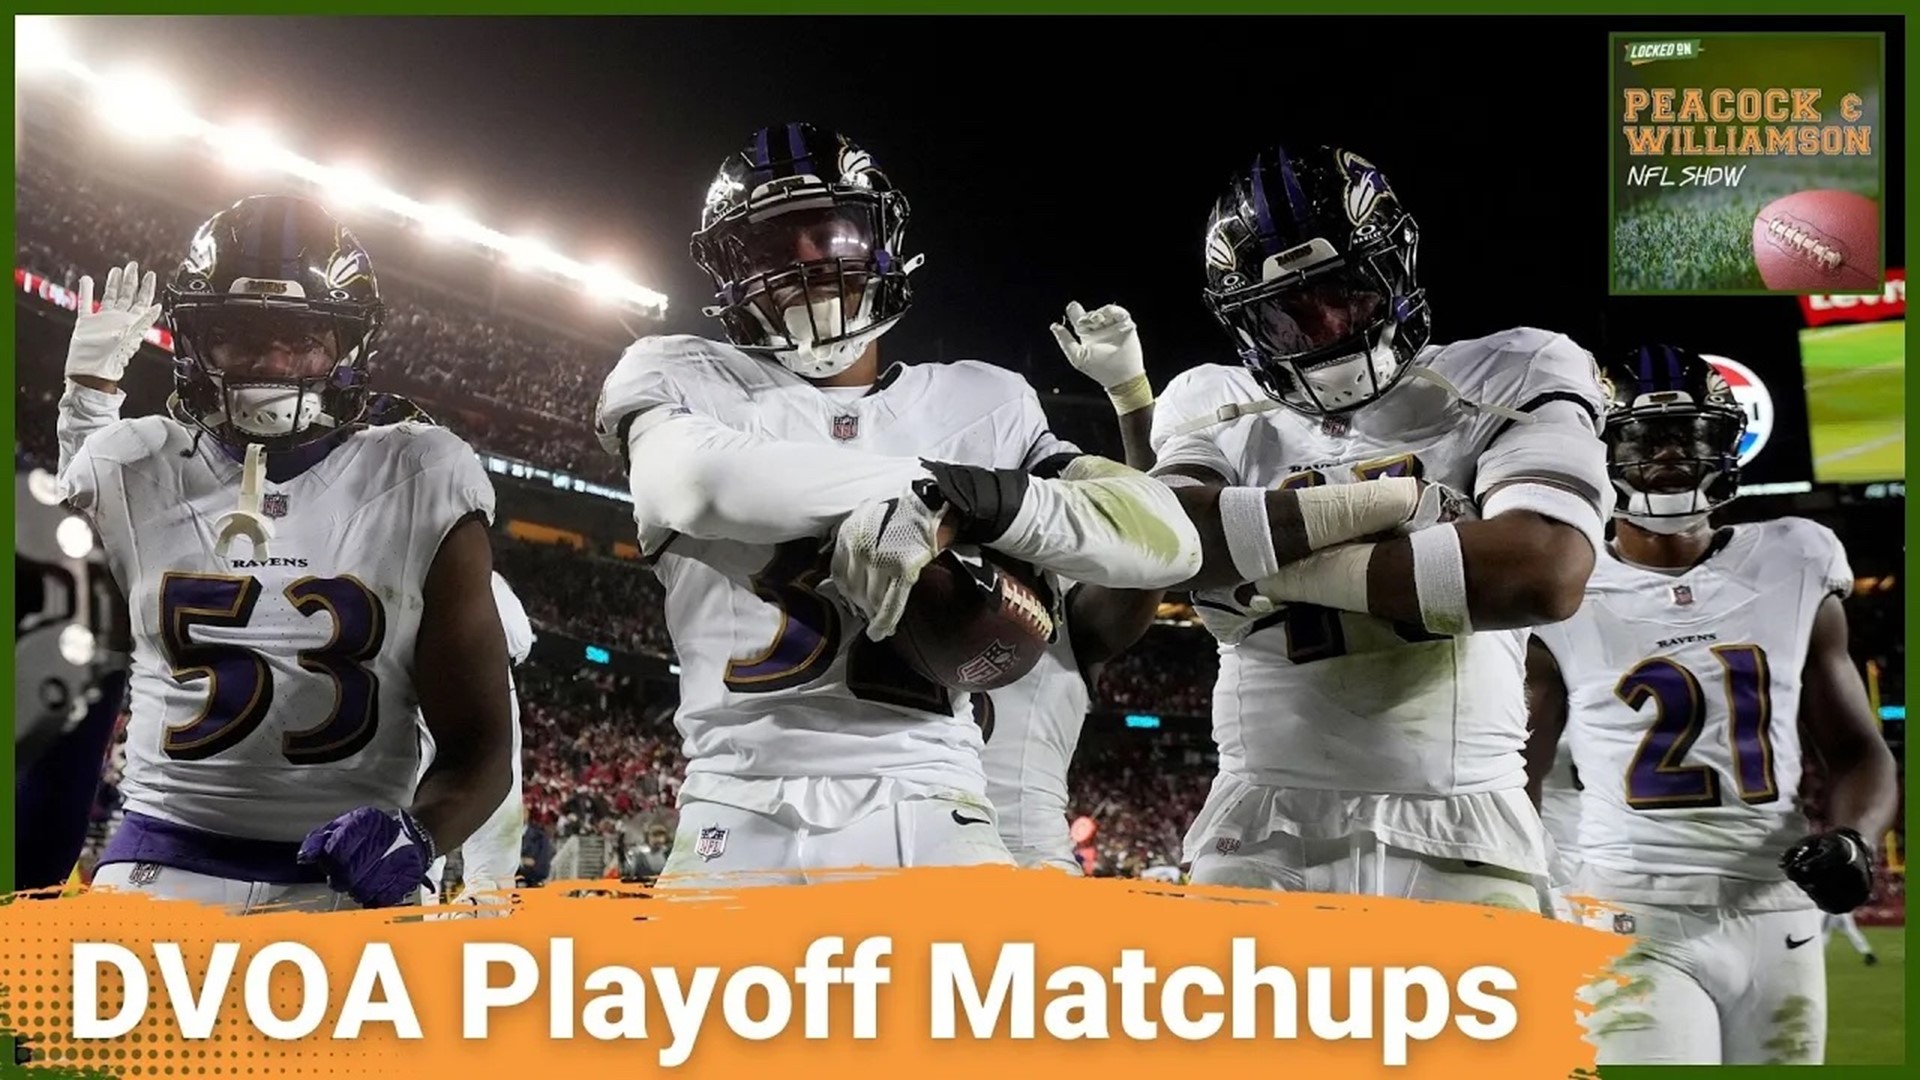 Aaron Schatz, creator of the DVOA metric, talks NFL matchups and why the Baltimore Ravens and San Francisco 49ers are two of the best teams in recent history.